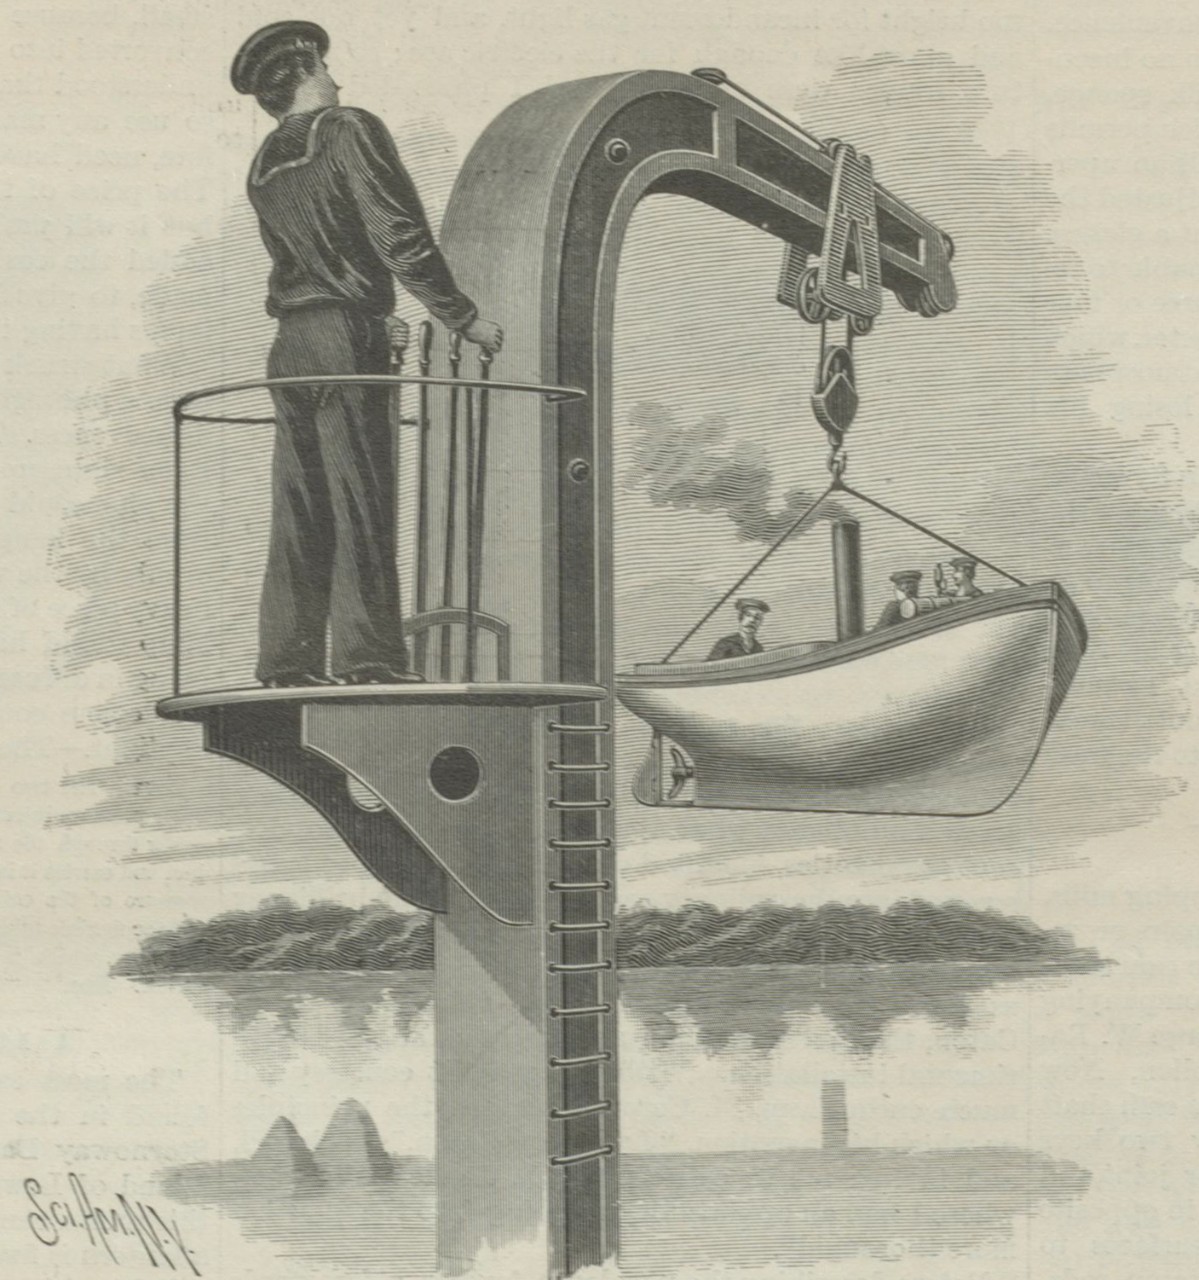 An engraving of sailors placing a steam launch in the water with a crane.